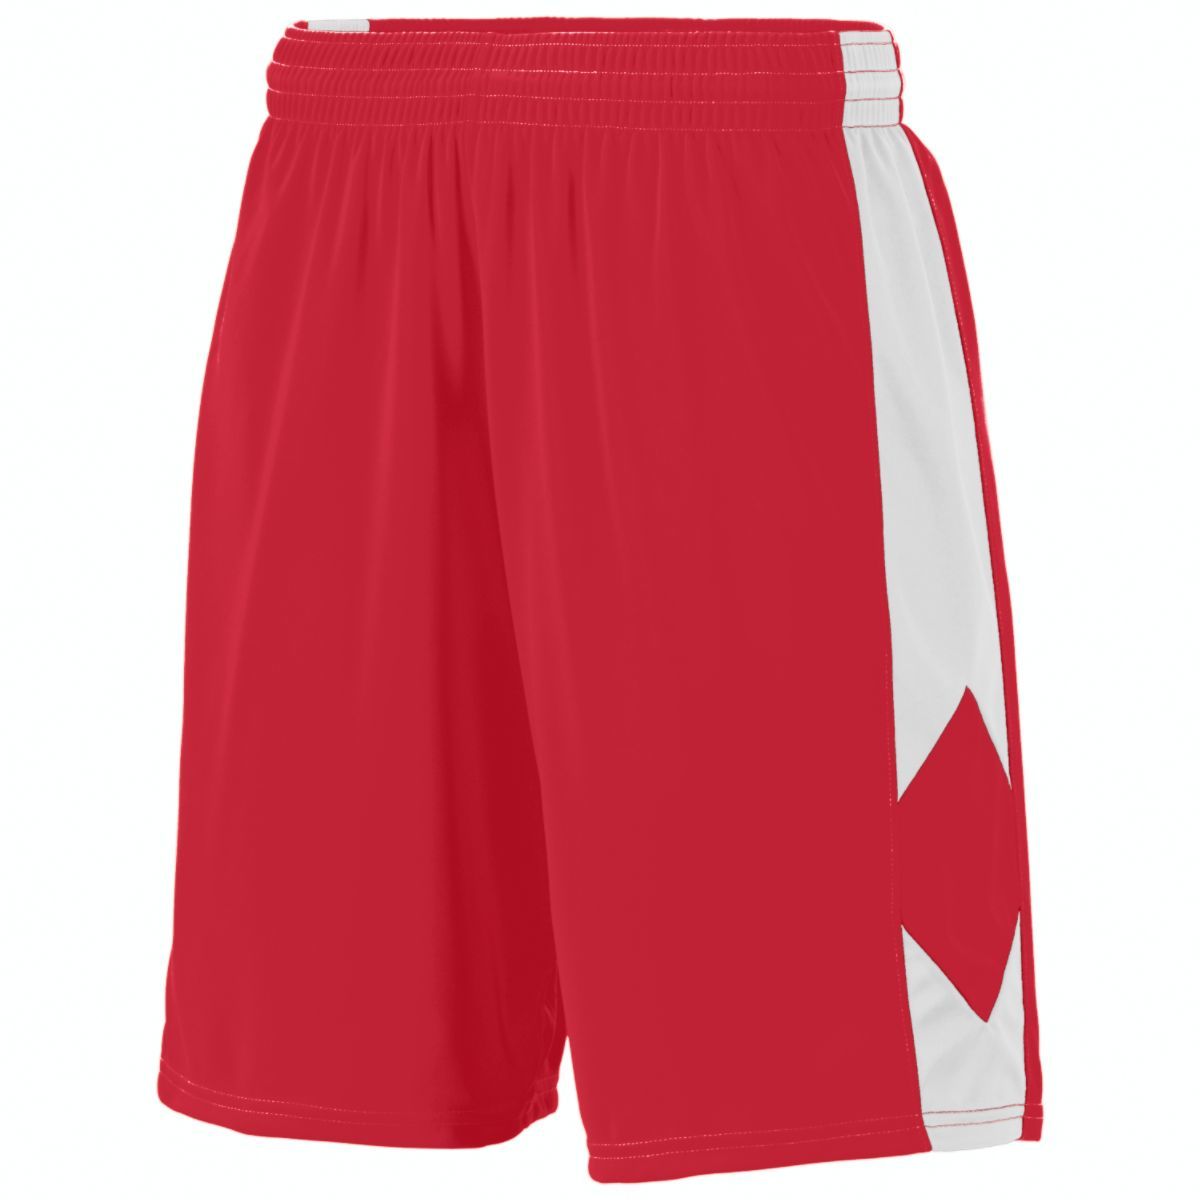 Augusta Sportswear Youth Block Out Shorts in Red/White  -Part of the Youth, Youth-Shorts, Augusta-Products, Basketball, All-Sports, All-Sports-1 product lines at KanaleyCreations.com